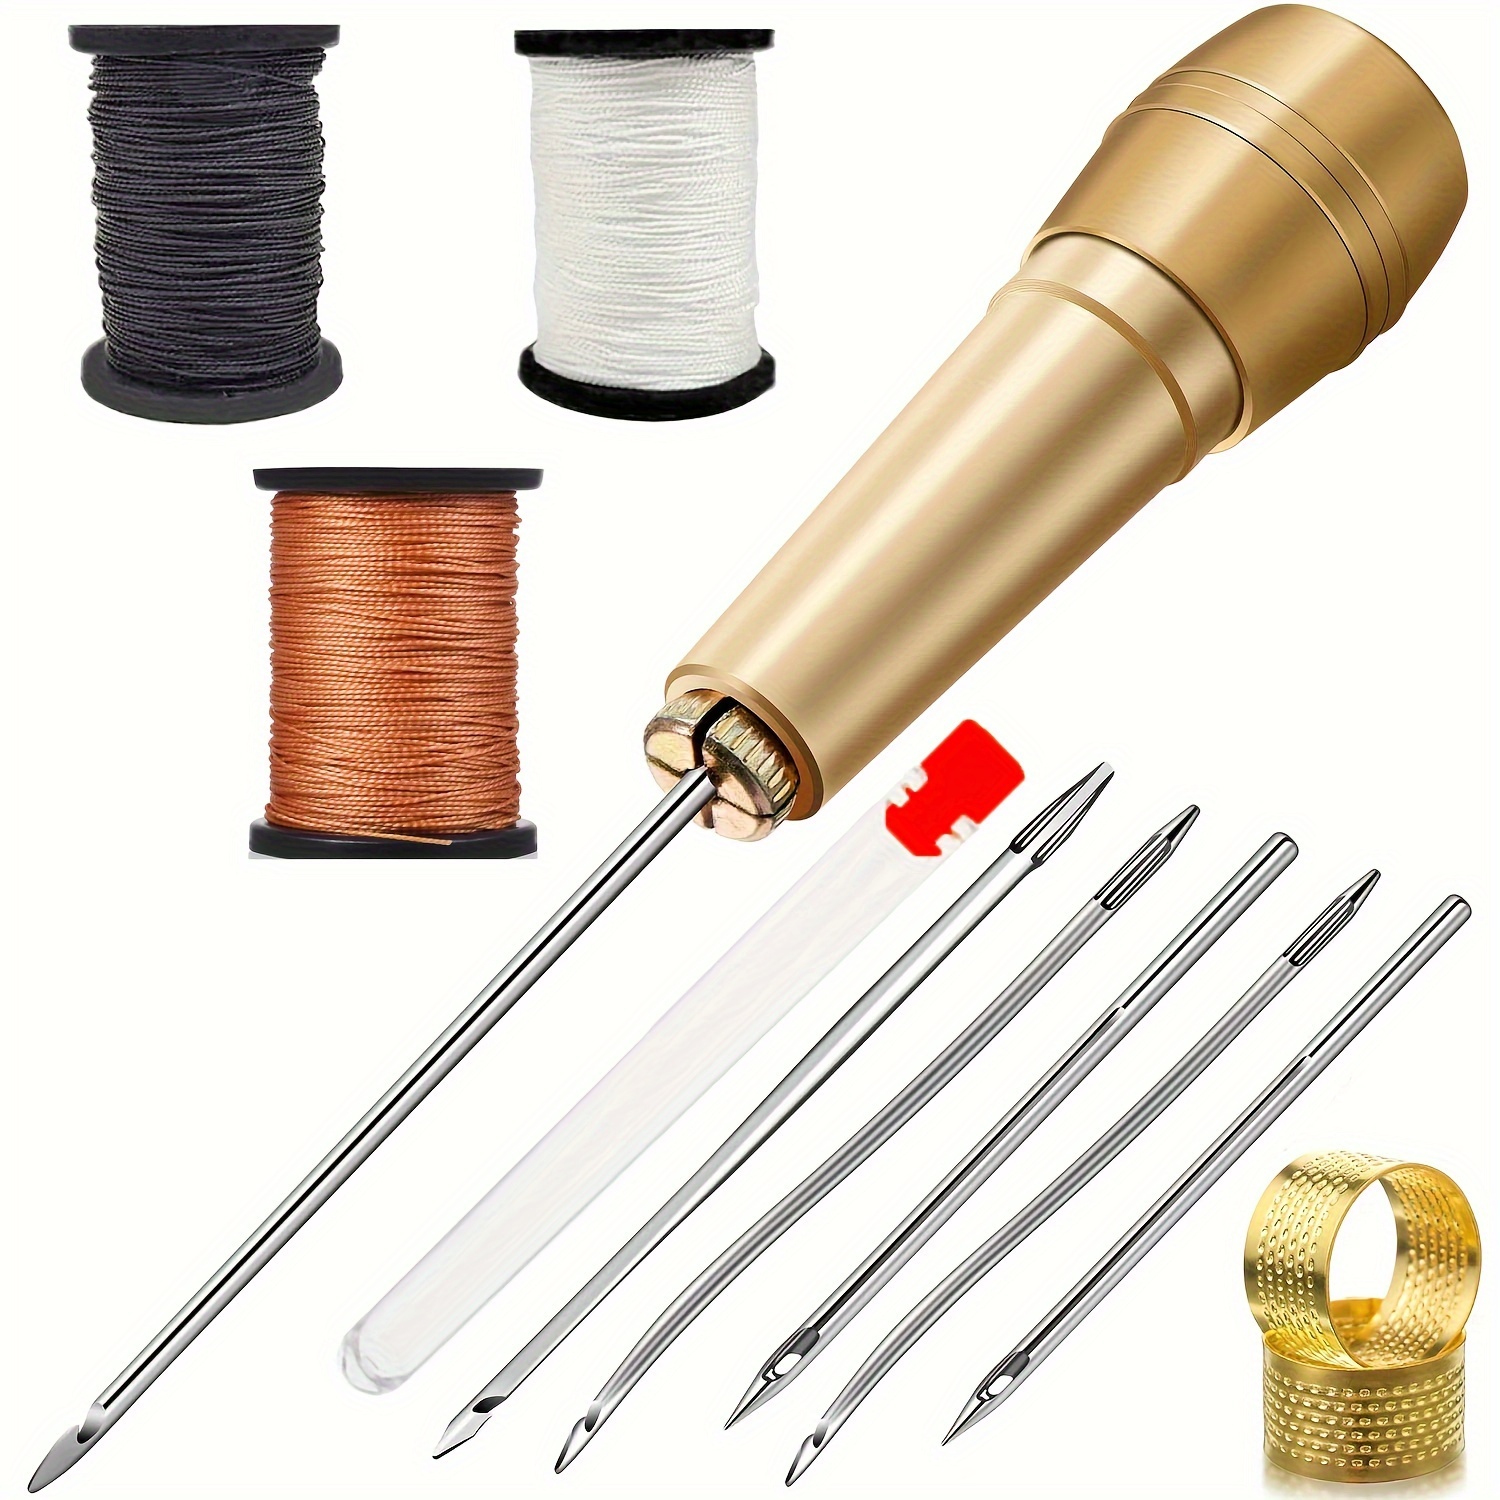 

13pcs Leather Sewing Kit Contains Diy Copper Handle Leather Sewing Awl With 6 Piece Needles And Brown, Black, White Nylon Thread Set For Leather Canvas Tent Shoes Repair Tool